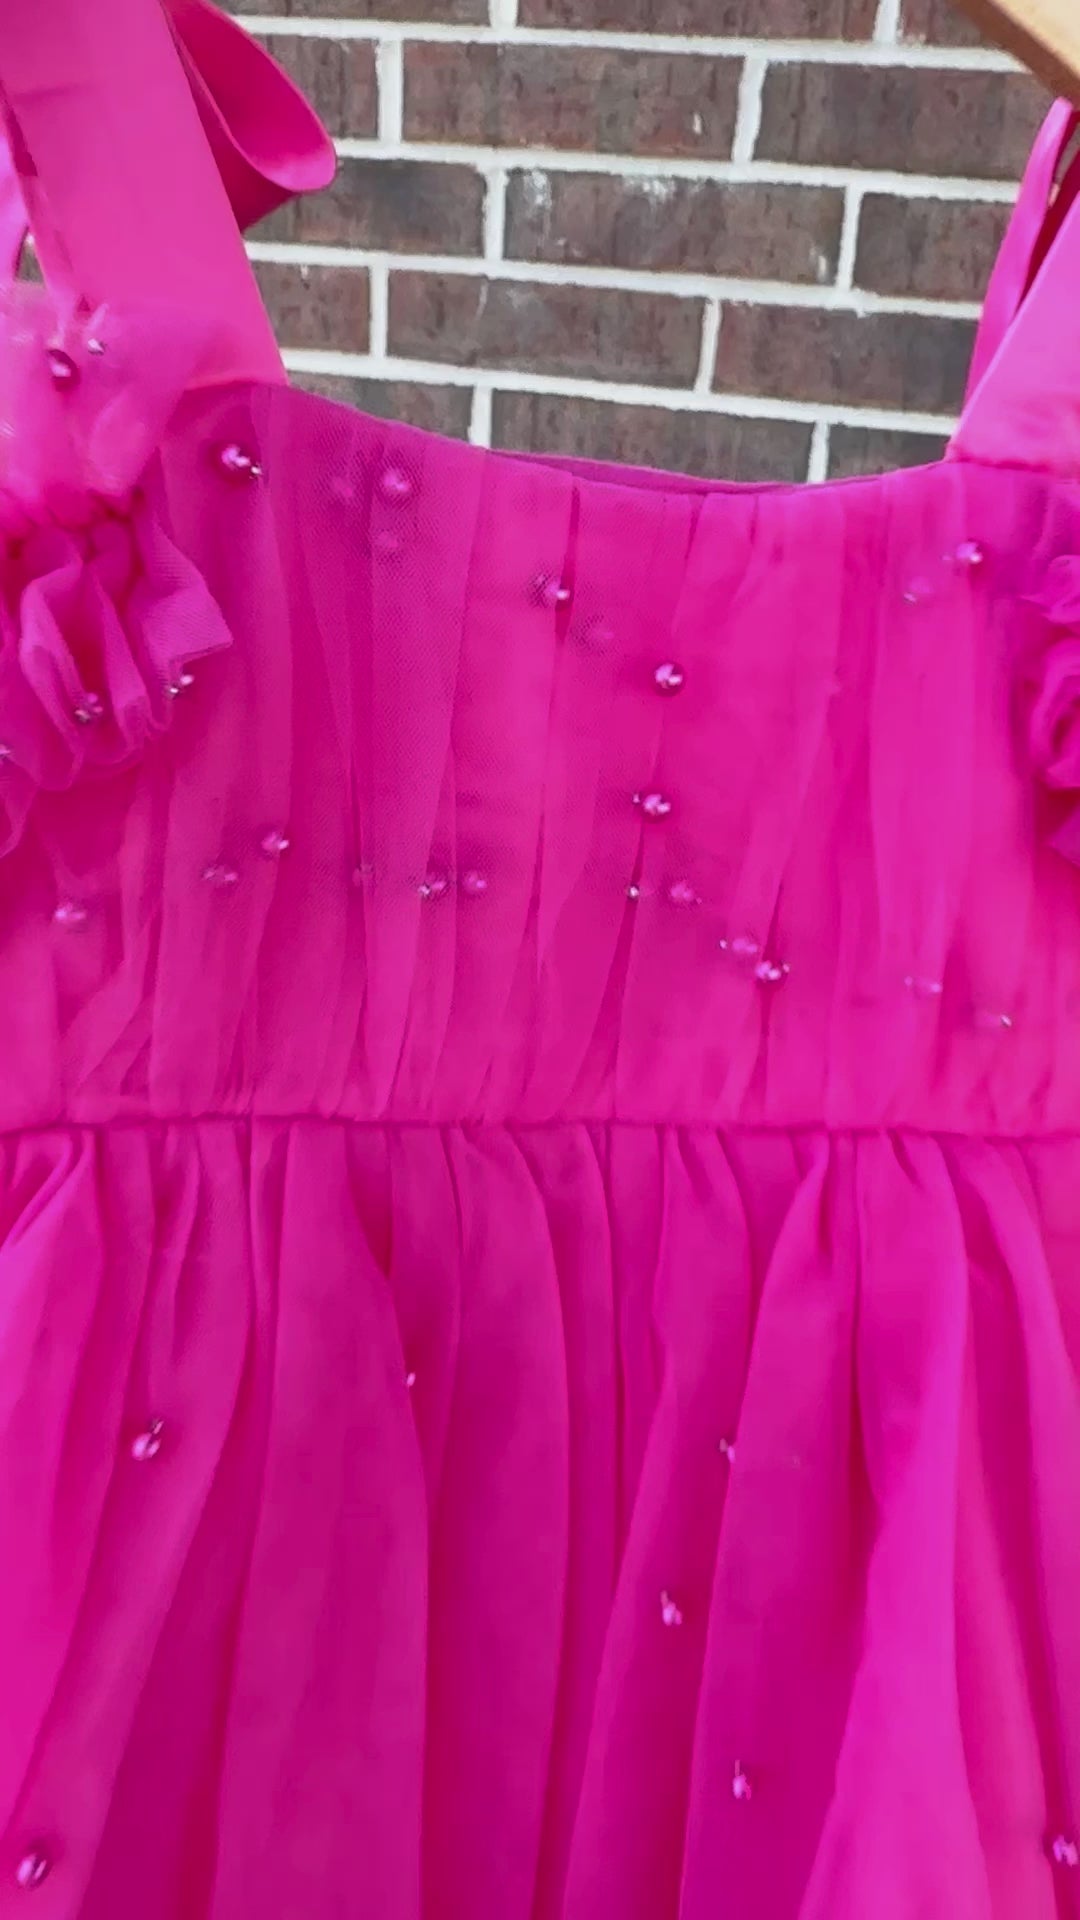 hot pink tulle princess birthday girl dress with pink pearls and bow tied shoulders with ruffled off shoulder sleeves. Baby toddler youth girls tutu party dress.